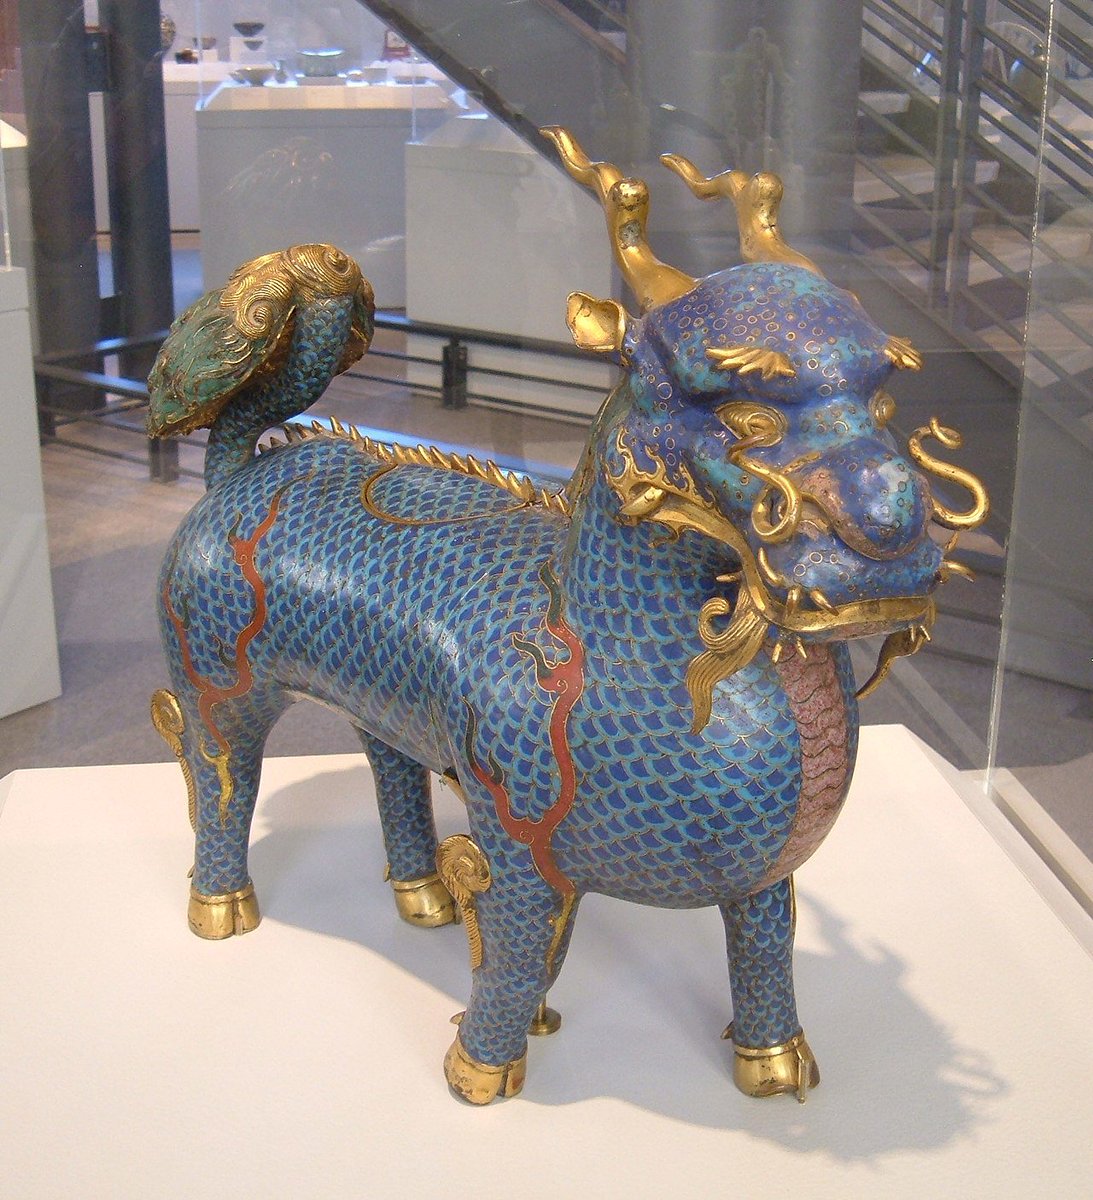 From Wikipedia: Qilin-shaped incense burner (17th-18th centuries) on display at the Iris & B. Gerald Cantor Center for Visual Arts on the Stanford University campus in Stanford, California. SFC 9157